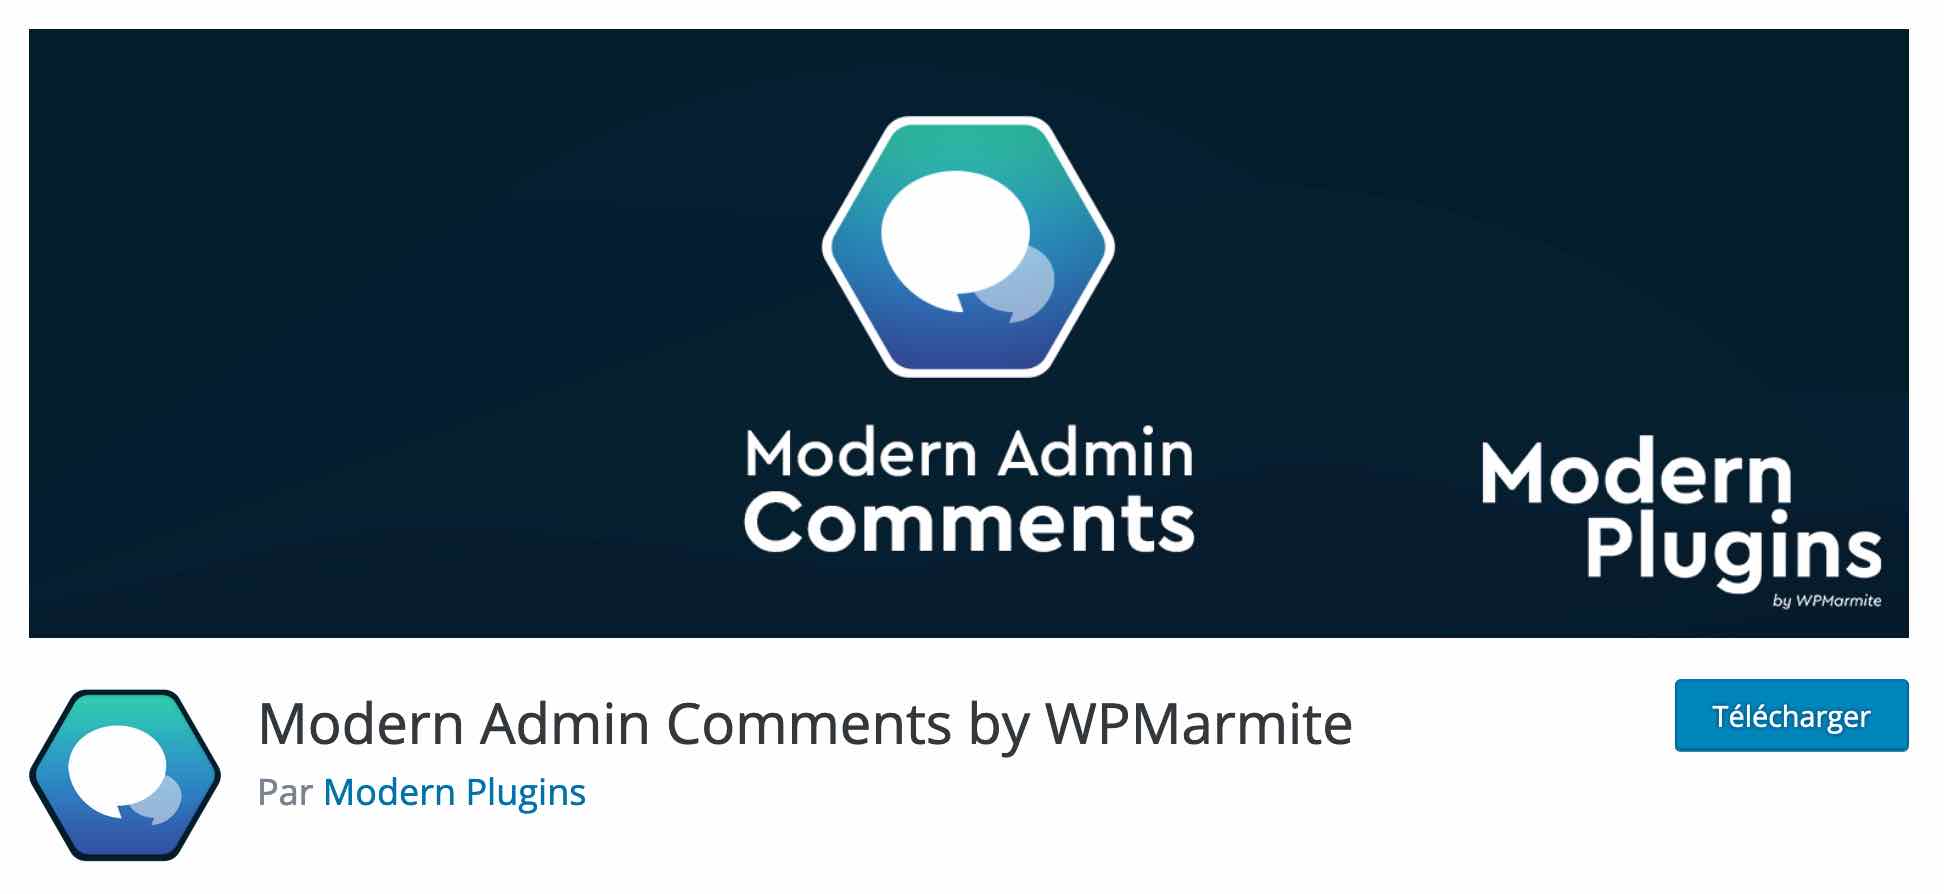 Modern Admin Comments